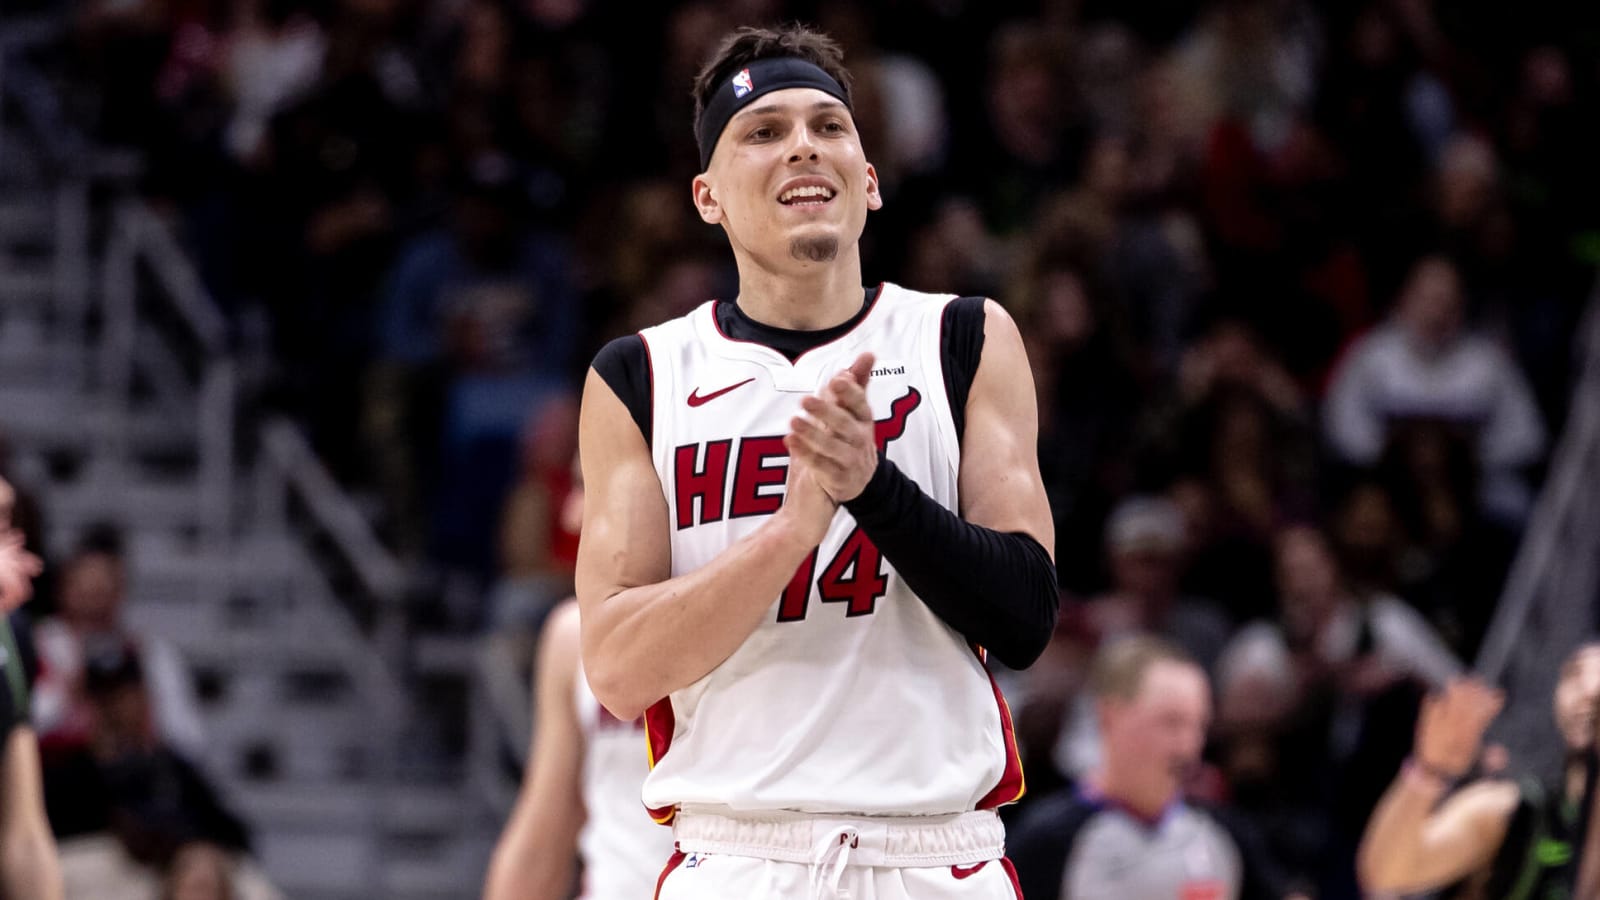 Report: Heat’s Tyler Herro Could Return vs. Rockets After Missing 20 Games